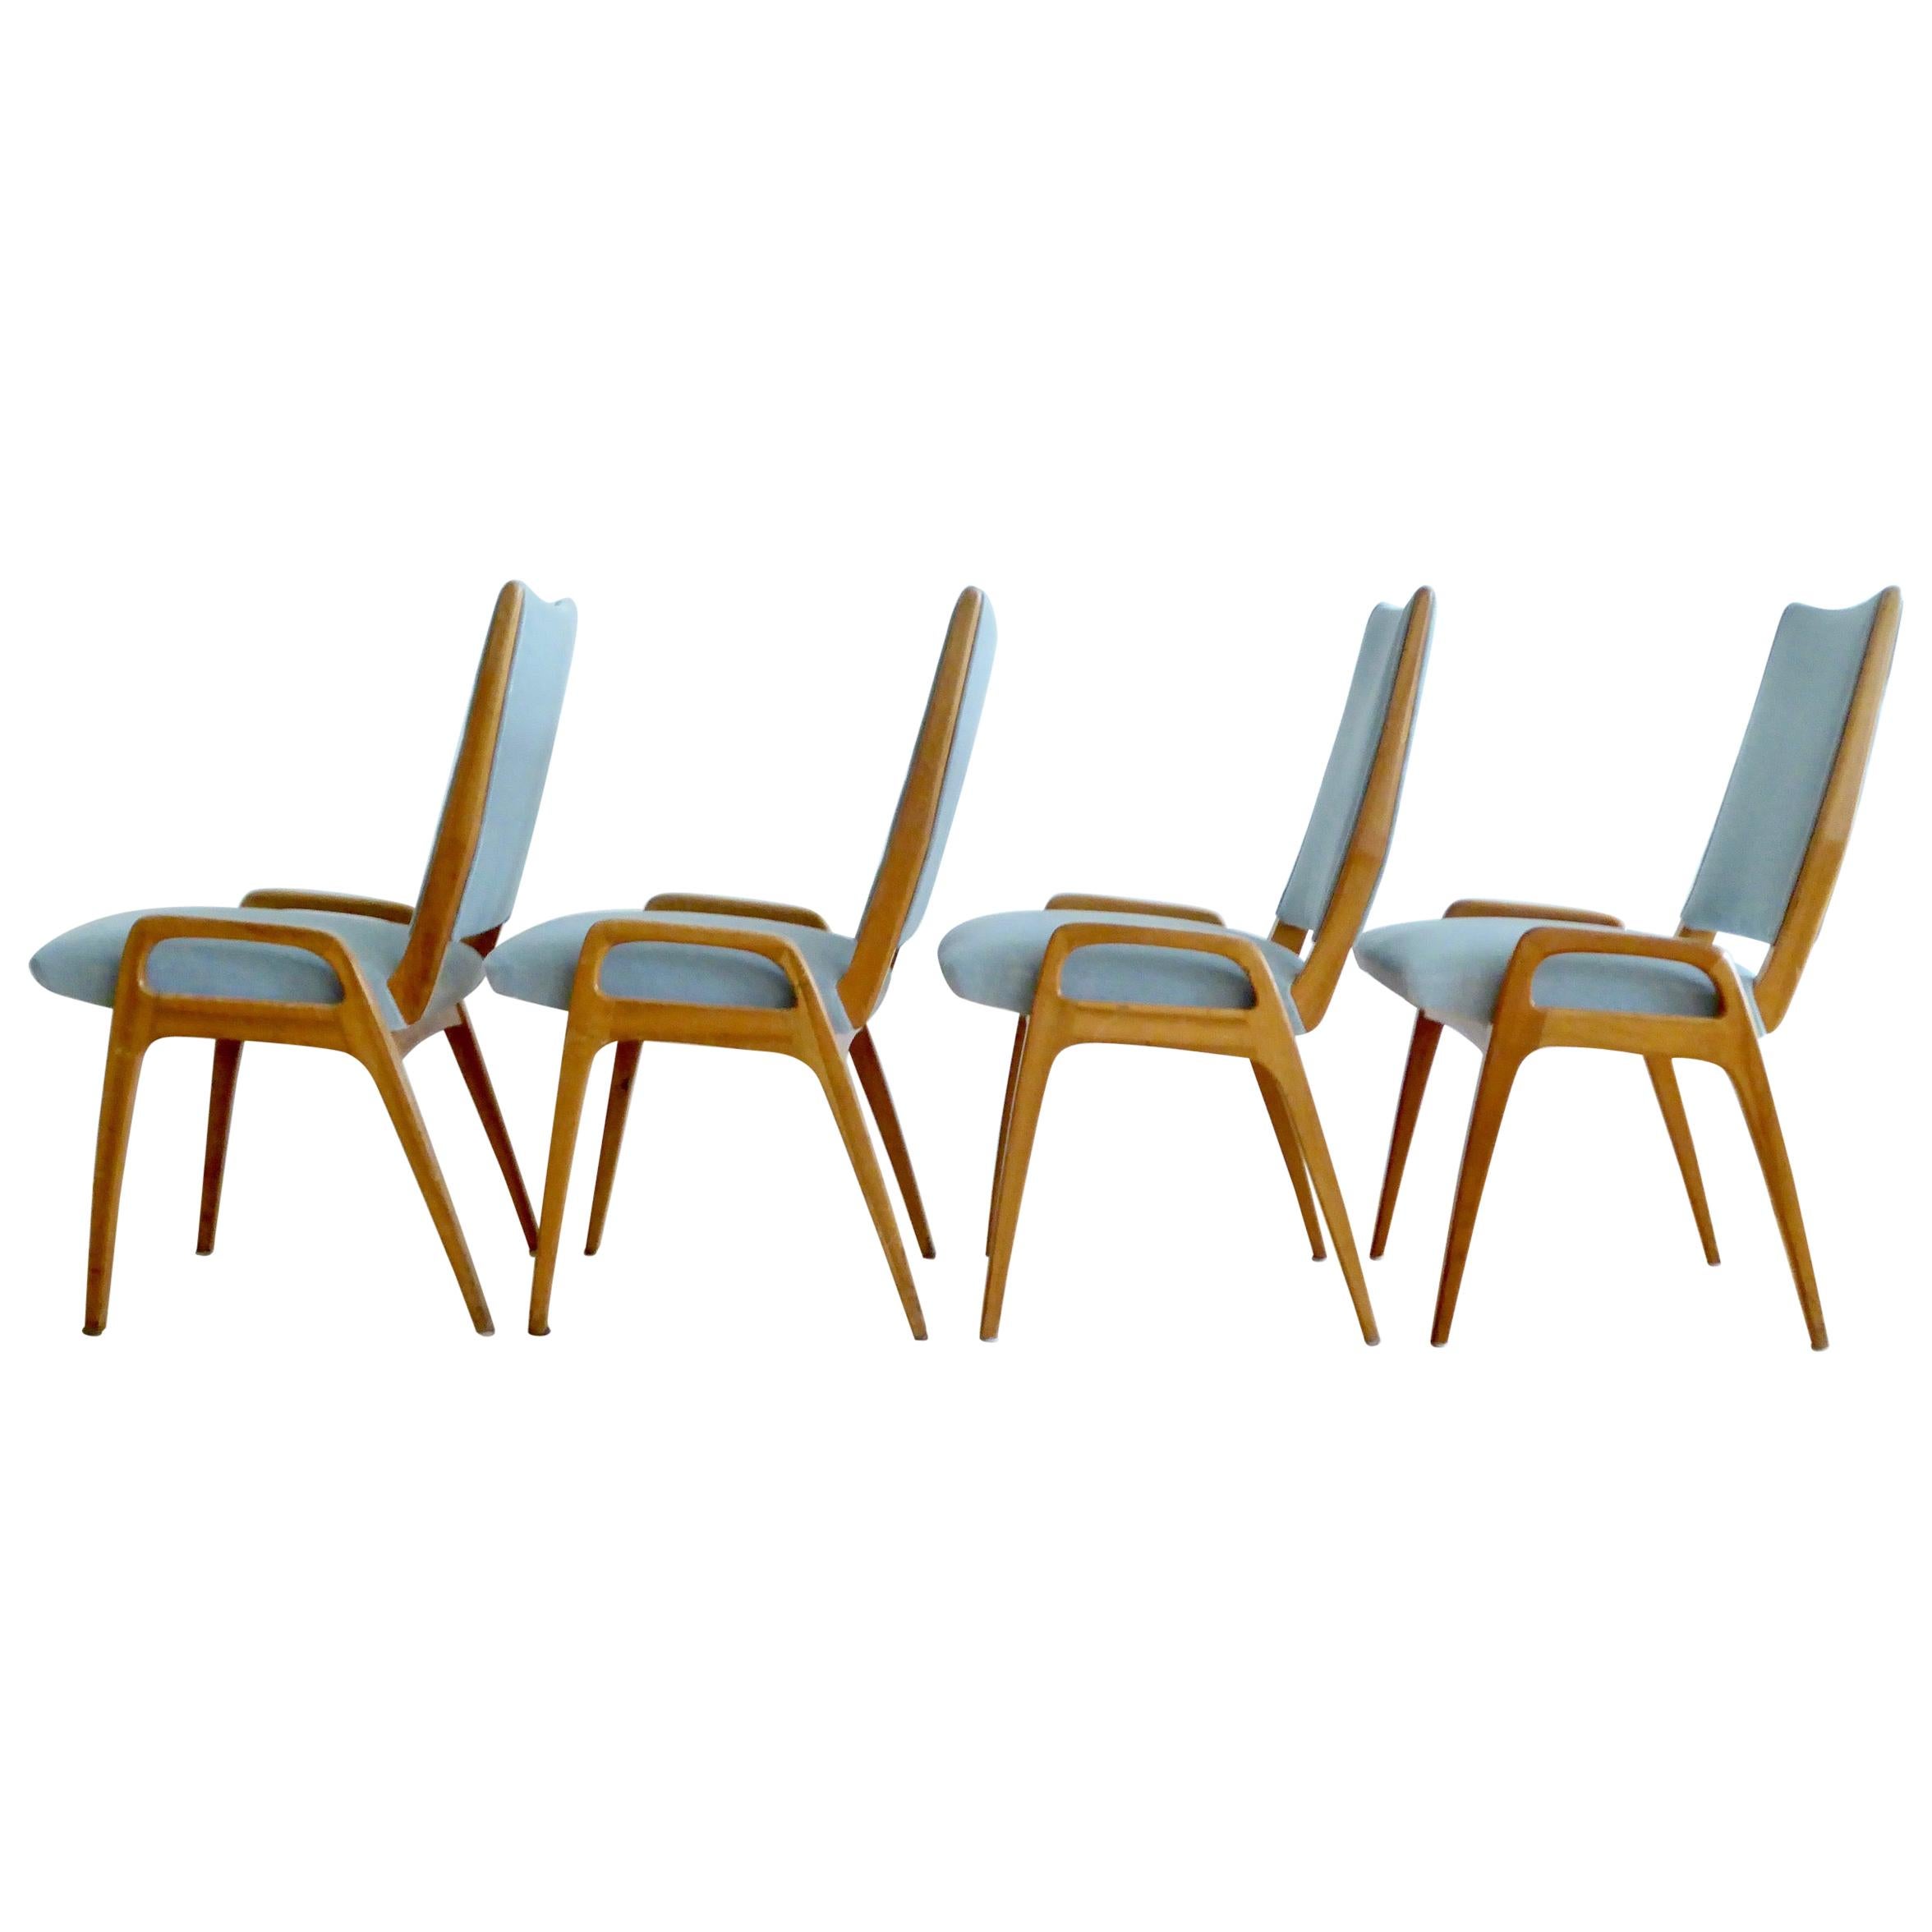 1950s Organic Shaped Dining Room Chairs For Sale